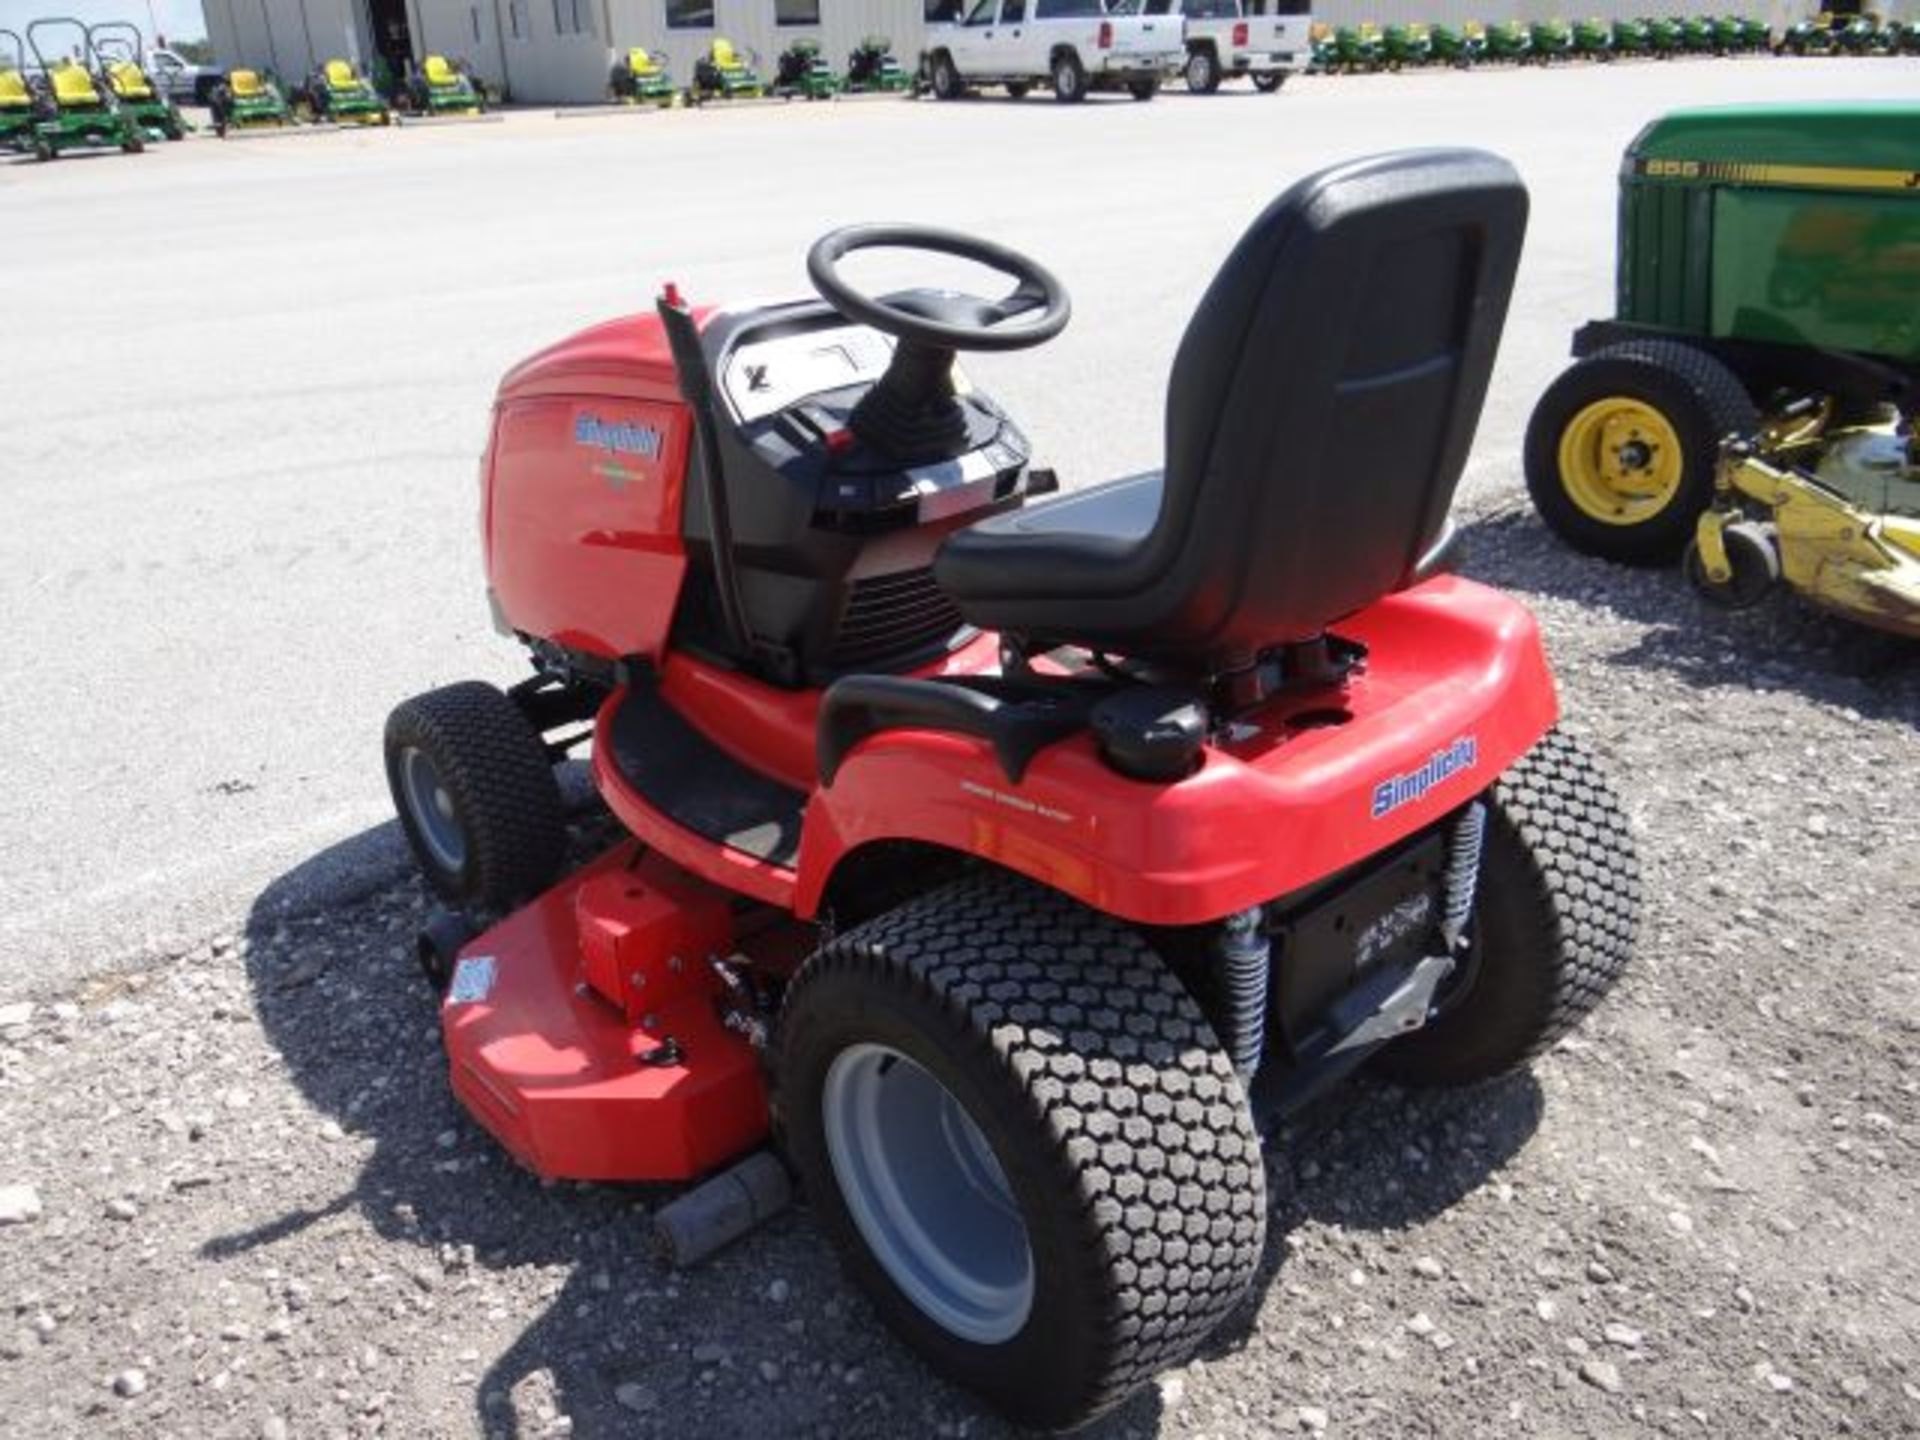 2013 Simplicity Broadmoor 27 Mower 135 hrs, 27hp, Briggs, Air Cooled, Hydro, 52" Deck, Rear - Image 3 of 4